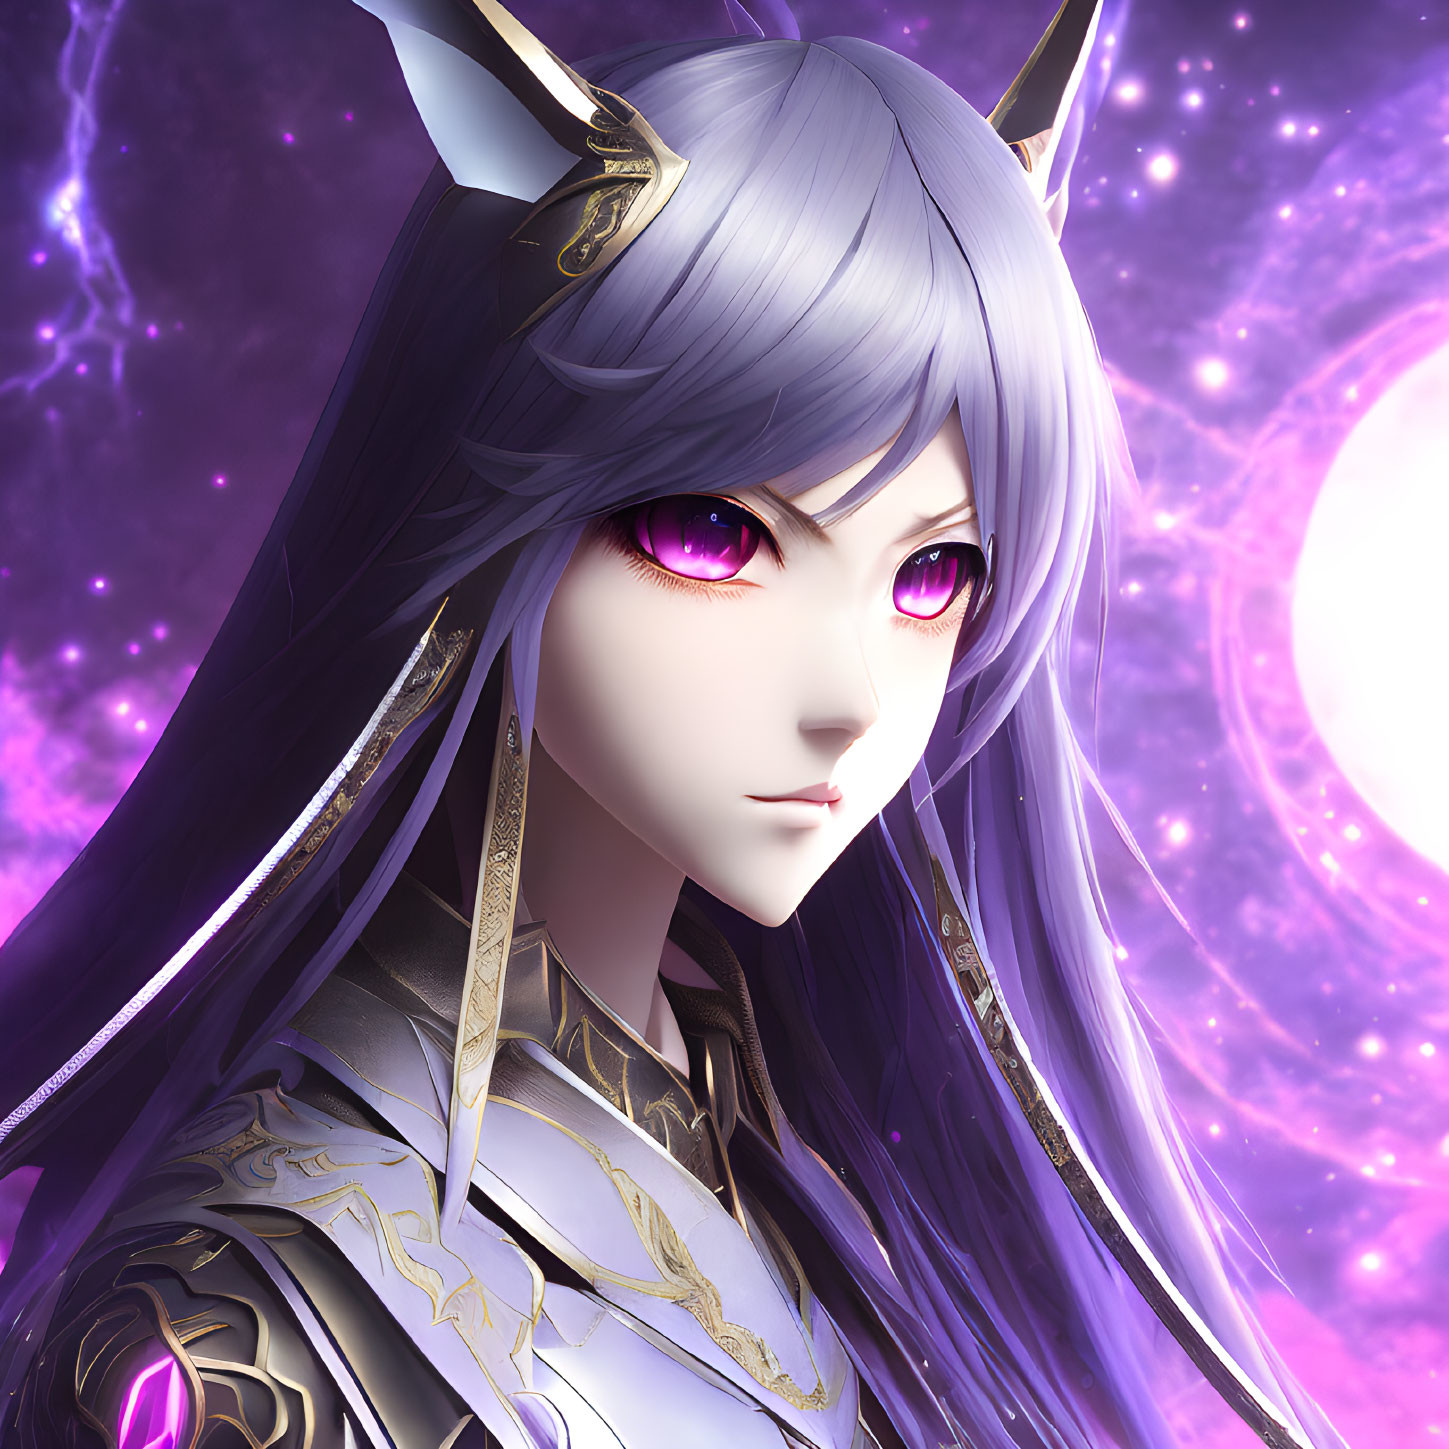 Character with Purple Eyes and Silver Hair in Cosmic Setting